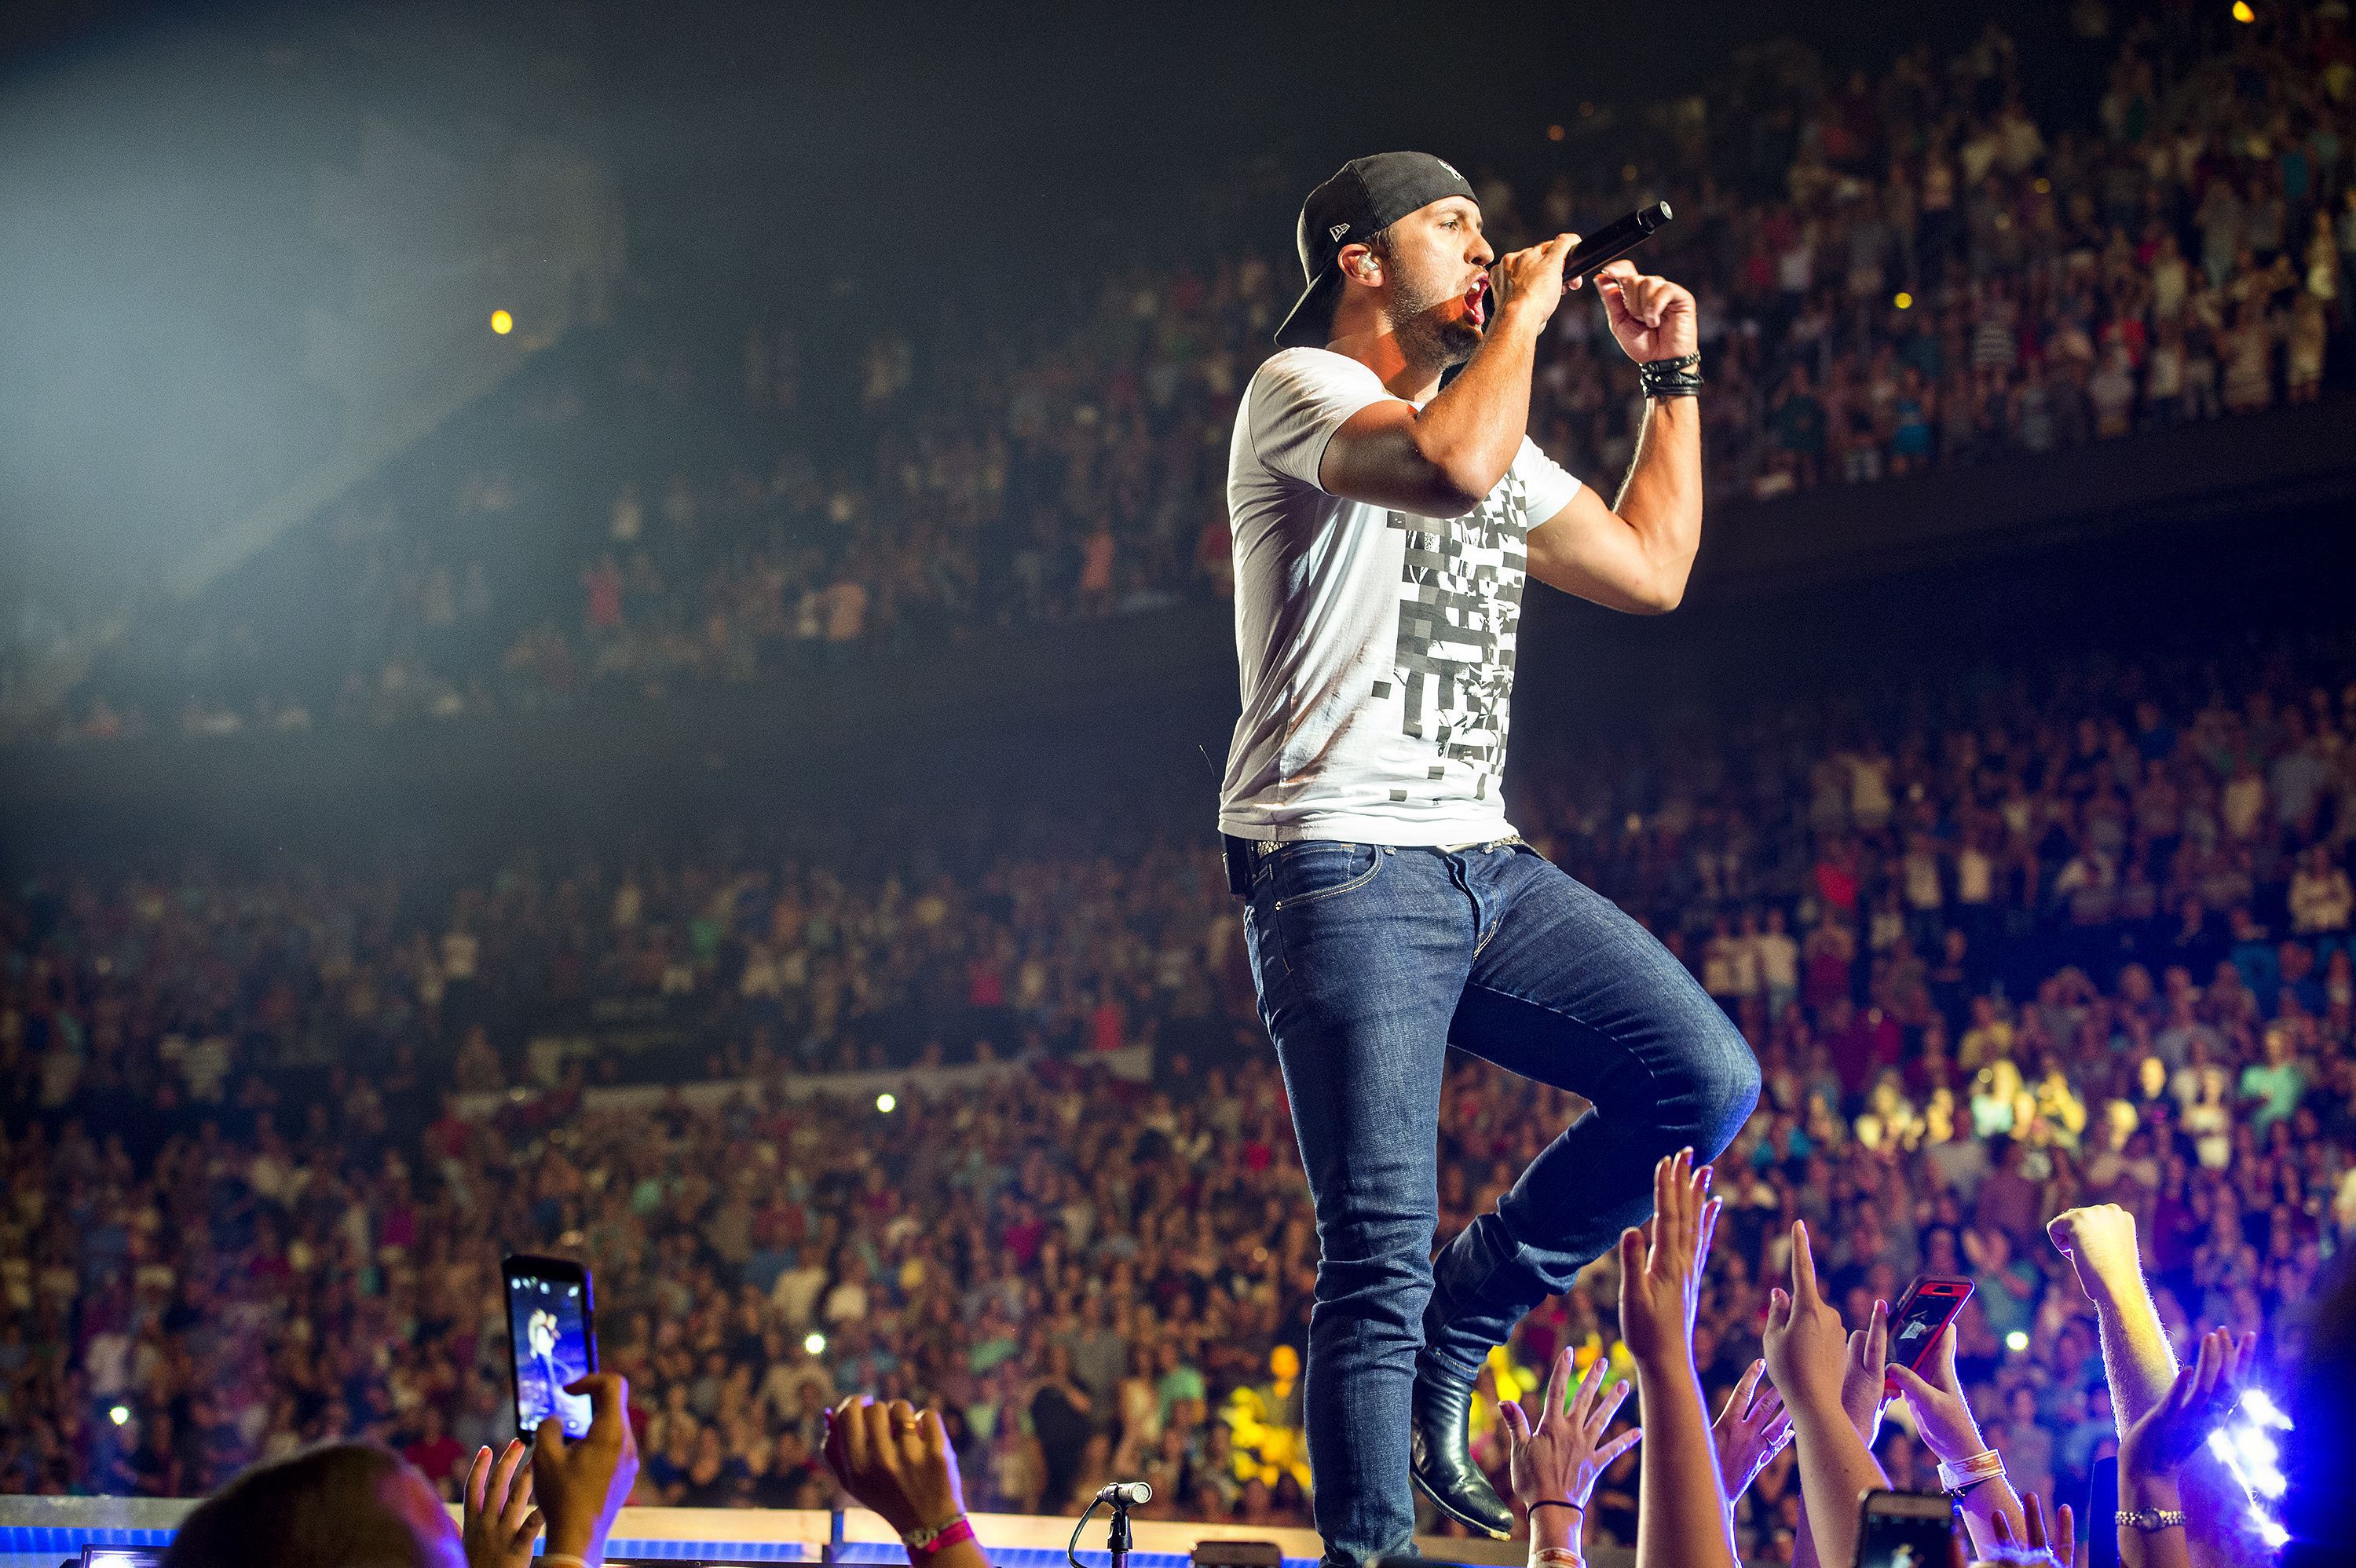 Luke Bryan Wallpapers Images Photos Pictures Backgrounds3000 x 1997